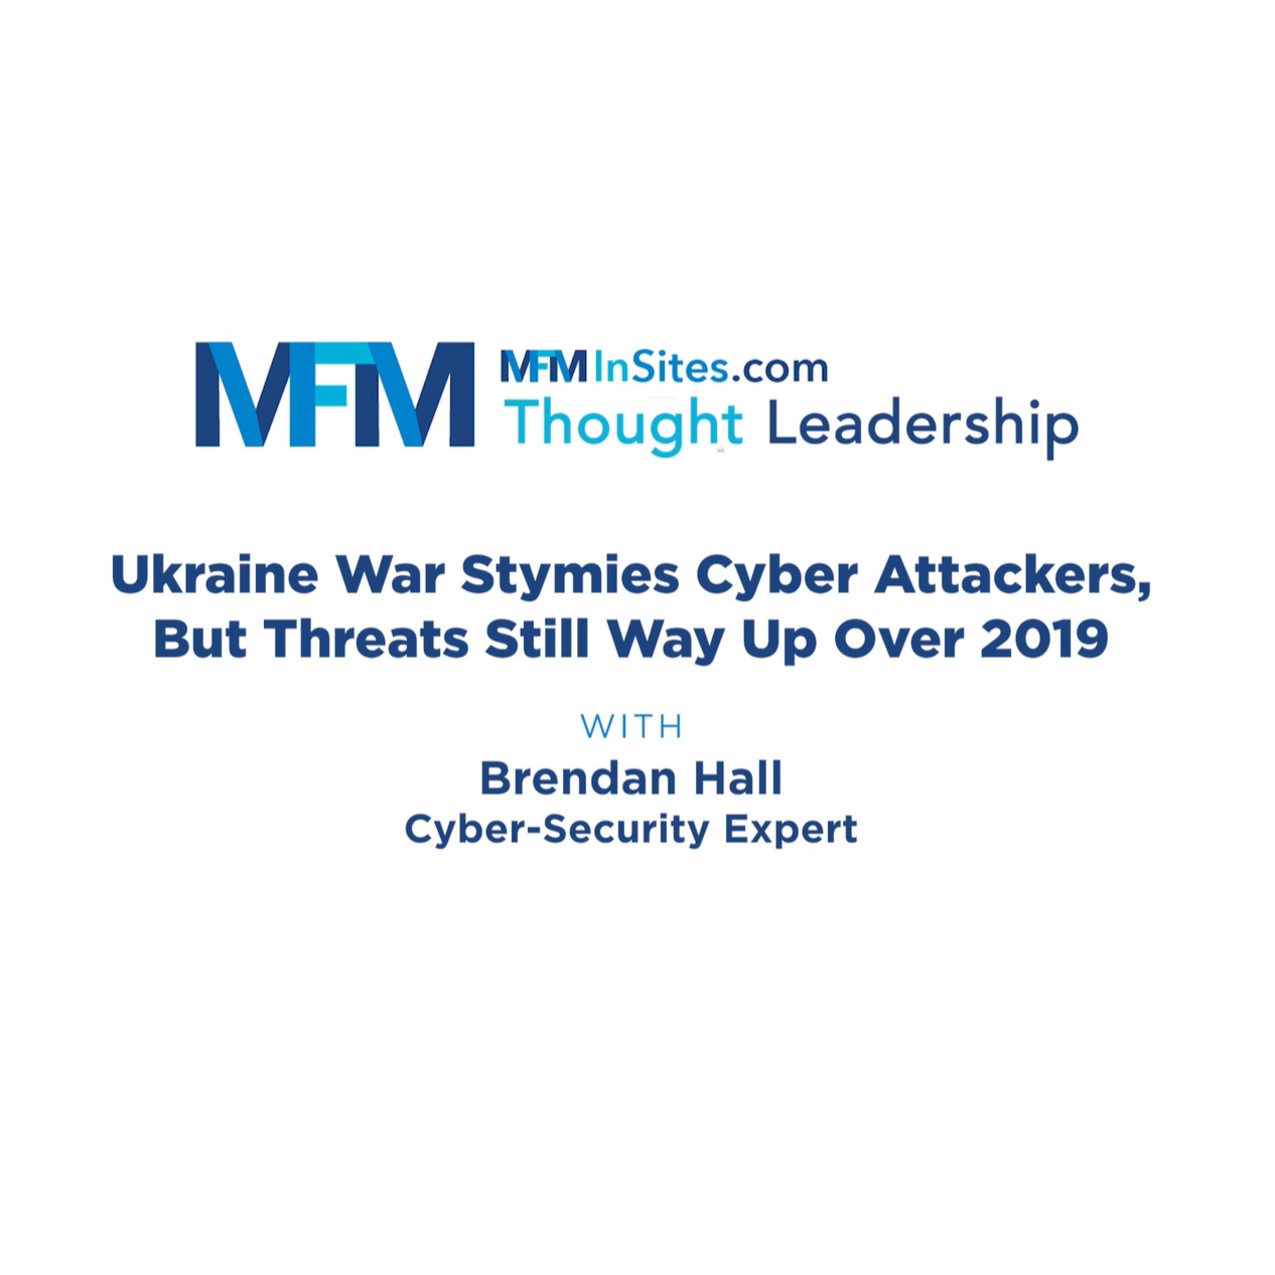 Cover image for  article: MFM -- Ukraine War Stymies Cyber Attackers, But Threats Still Way Up Over 2019 (Video)